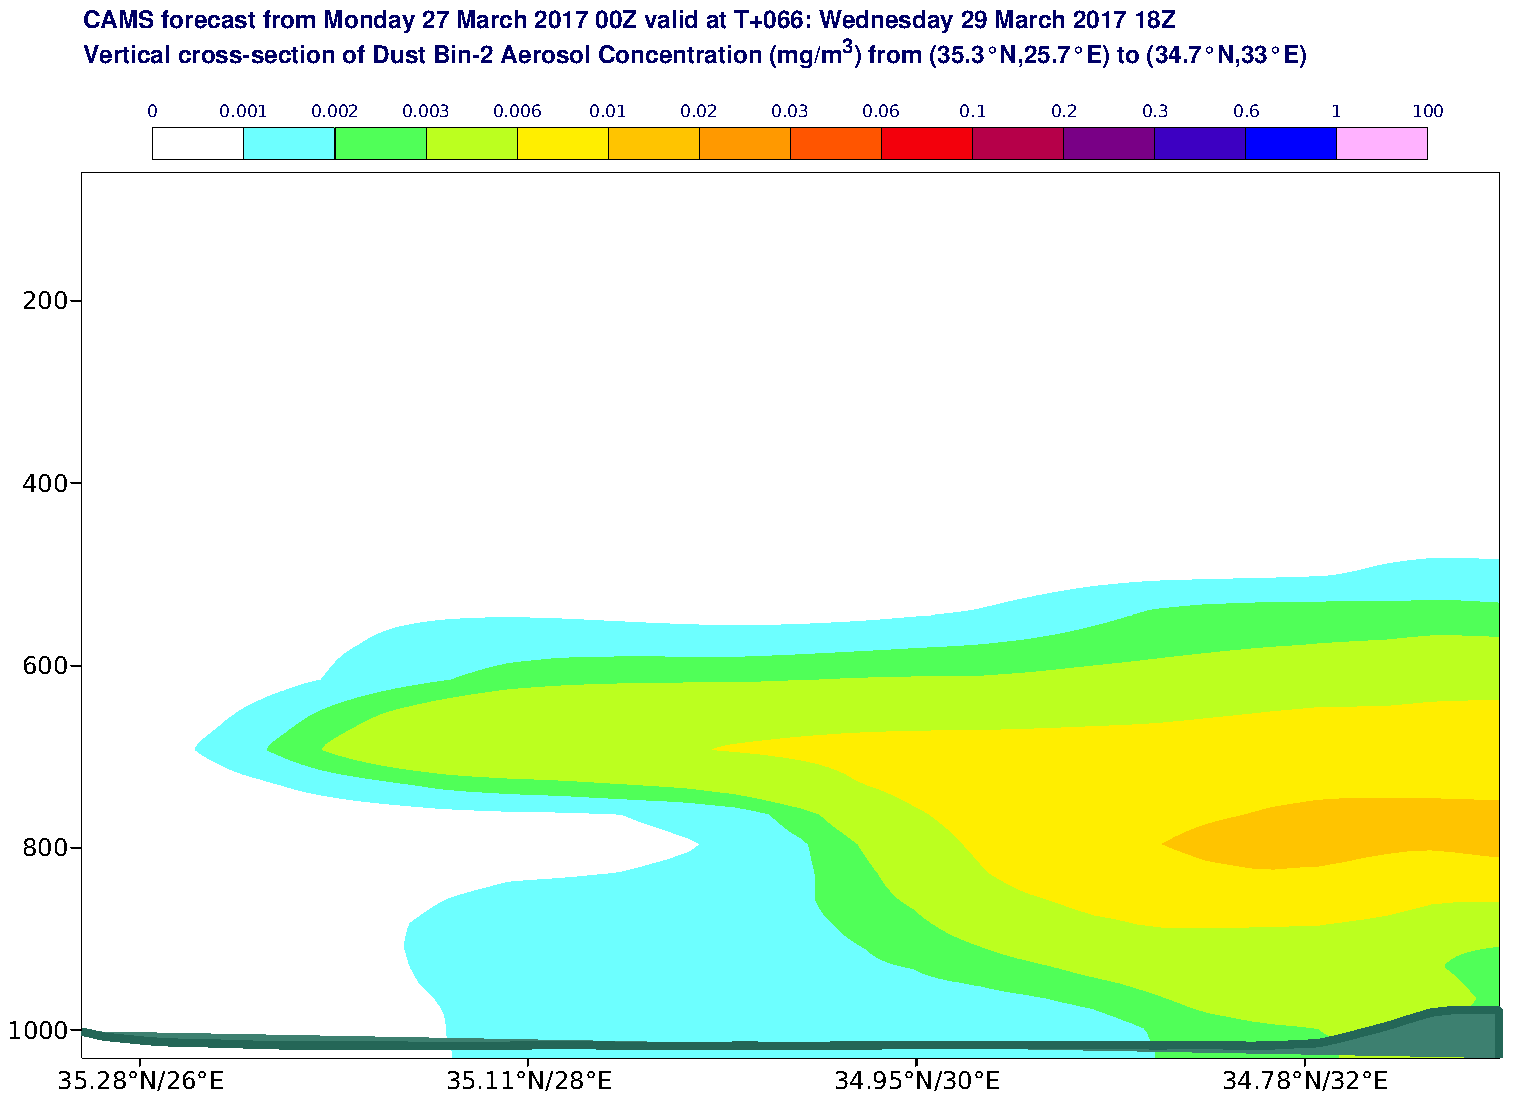 Vertical cross-section of Dust Bin-2 Aerosol Concentration (mg/m3) valid at T66 - 2017-03-29 18:00